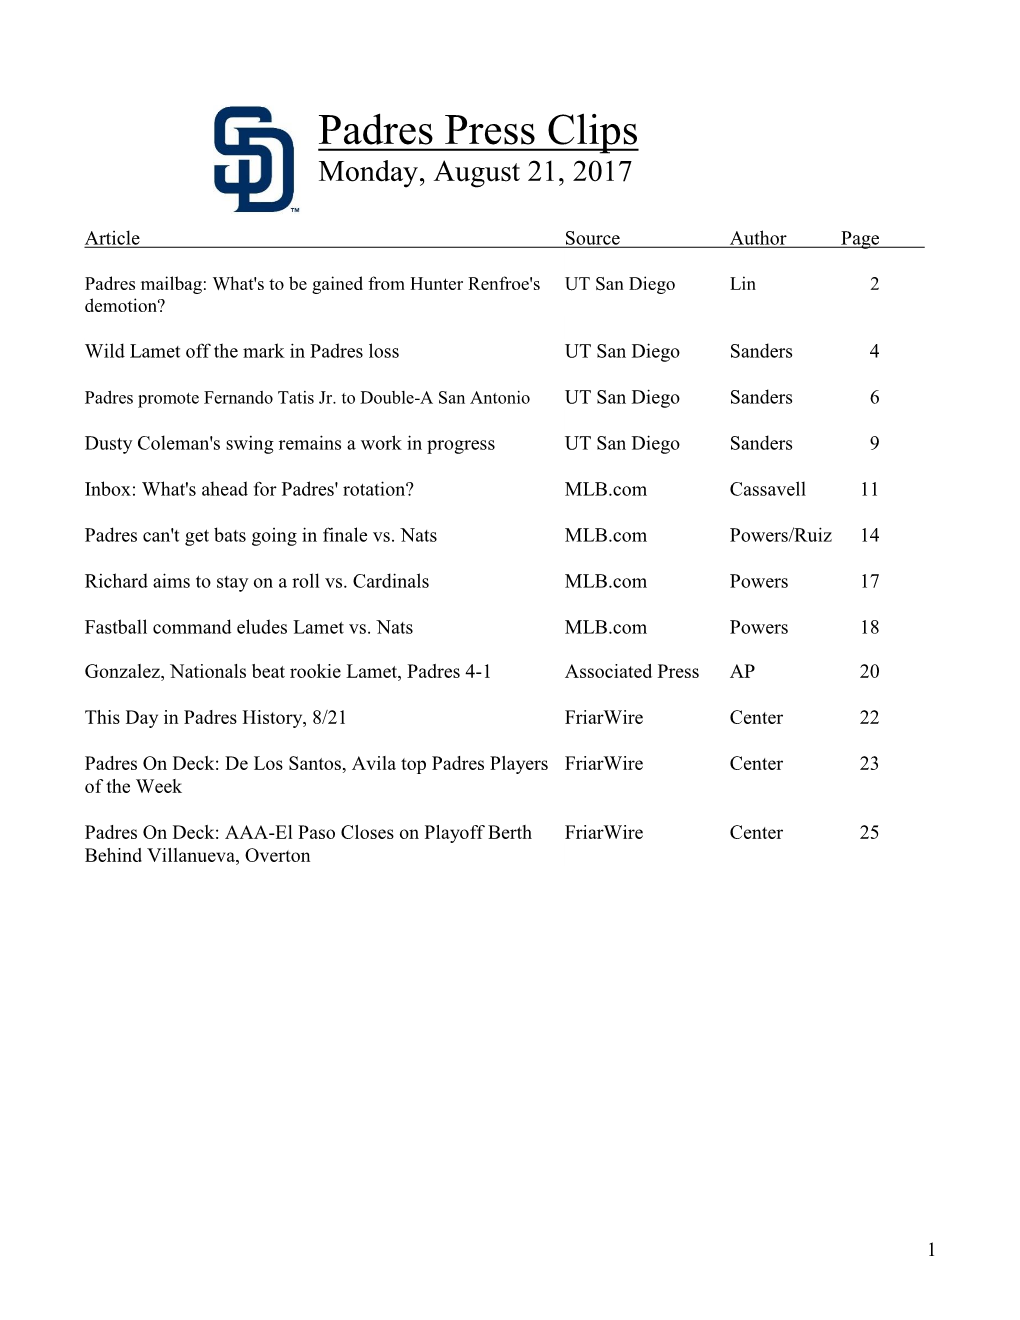 Padres Press Clips Monday, August 21, 2017